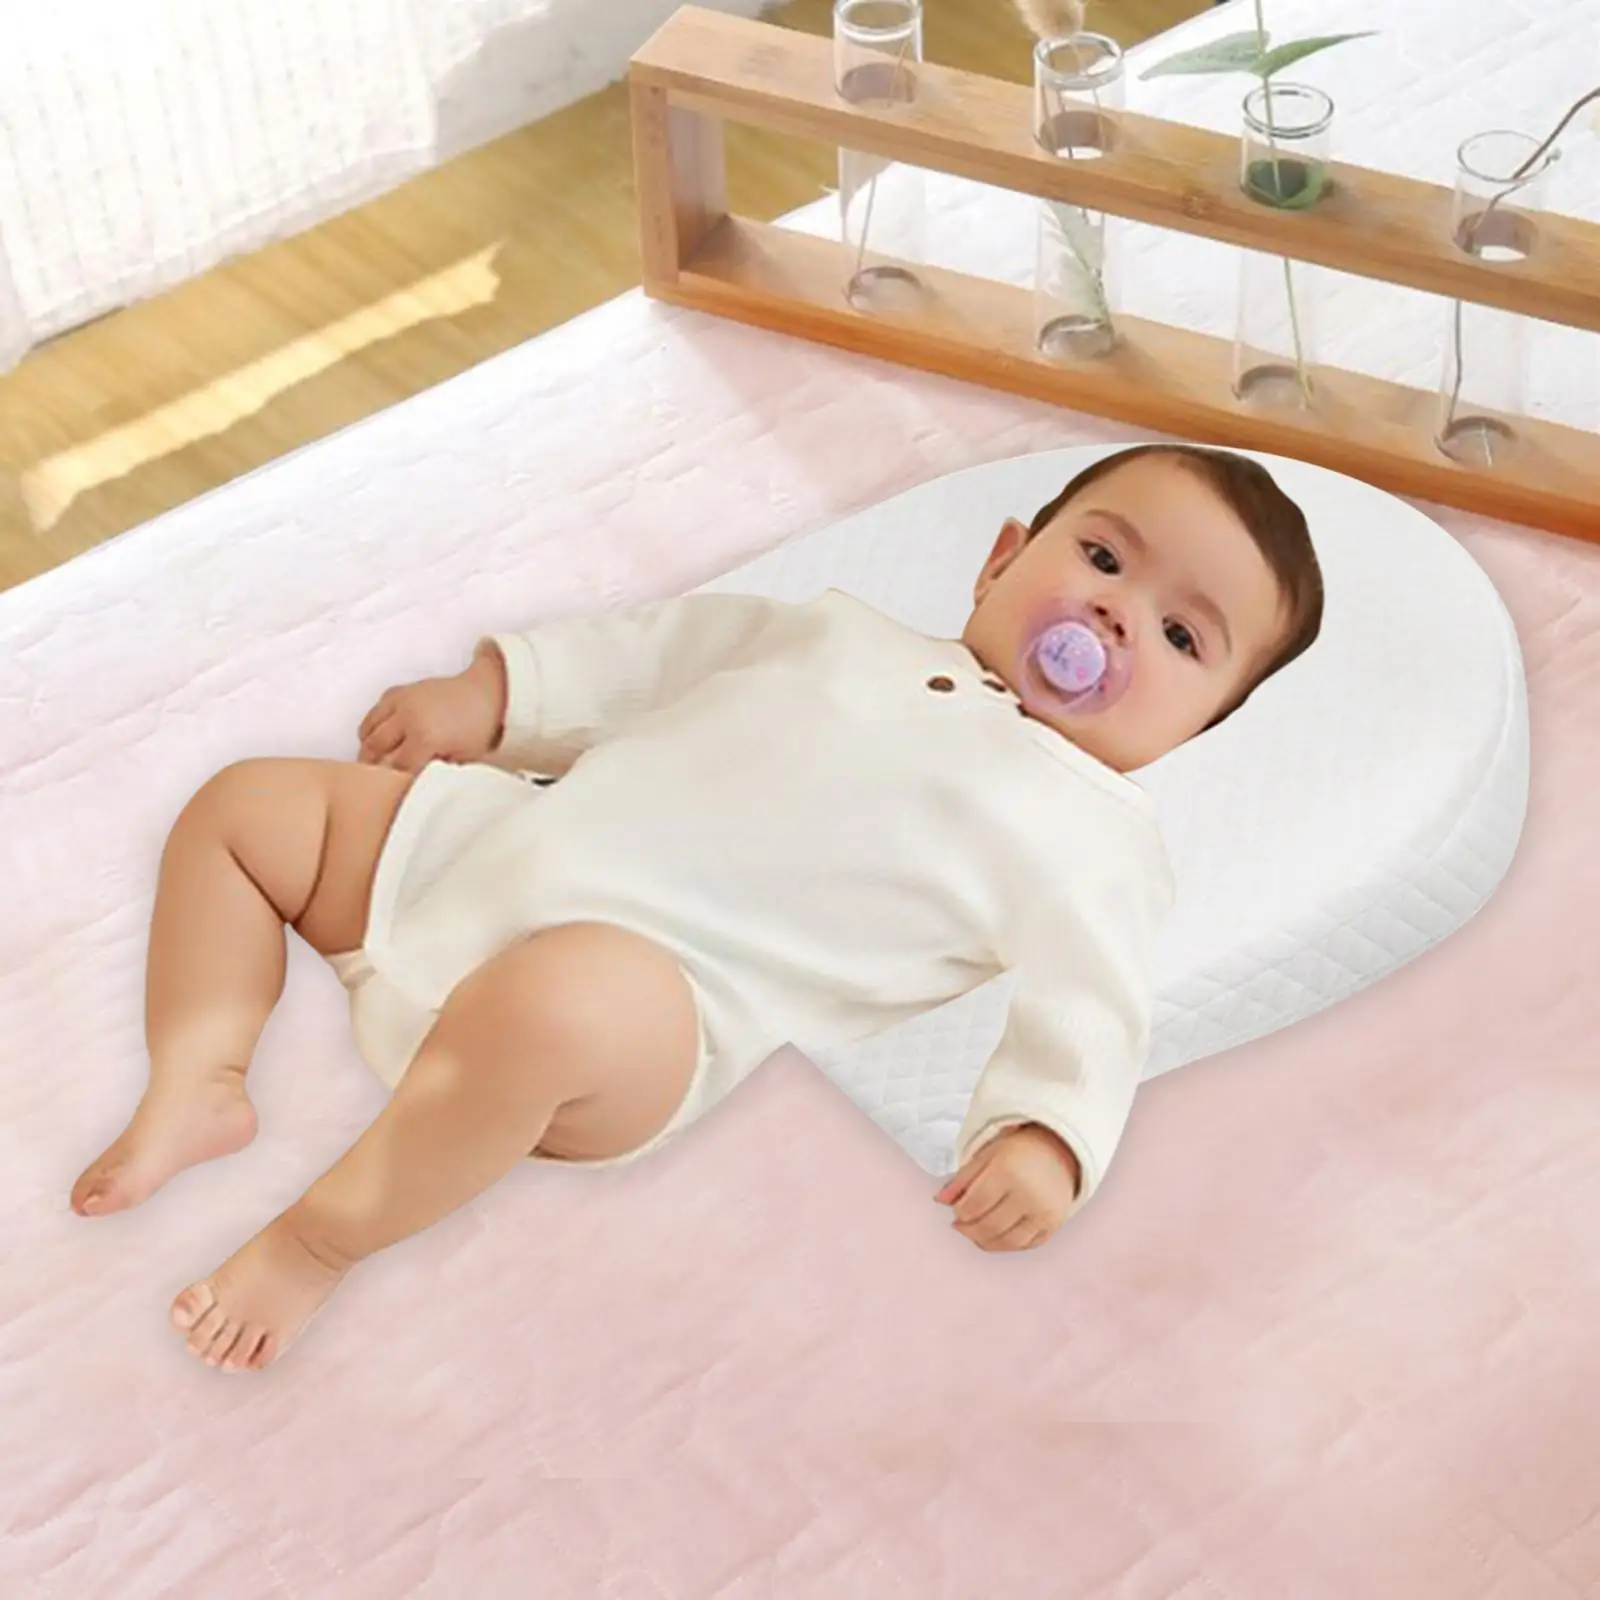 Baby Wedge Bed  sleep position Soft Cushion for Toddler Sleeping